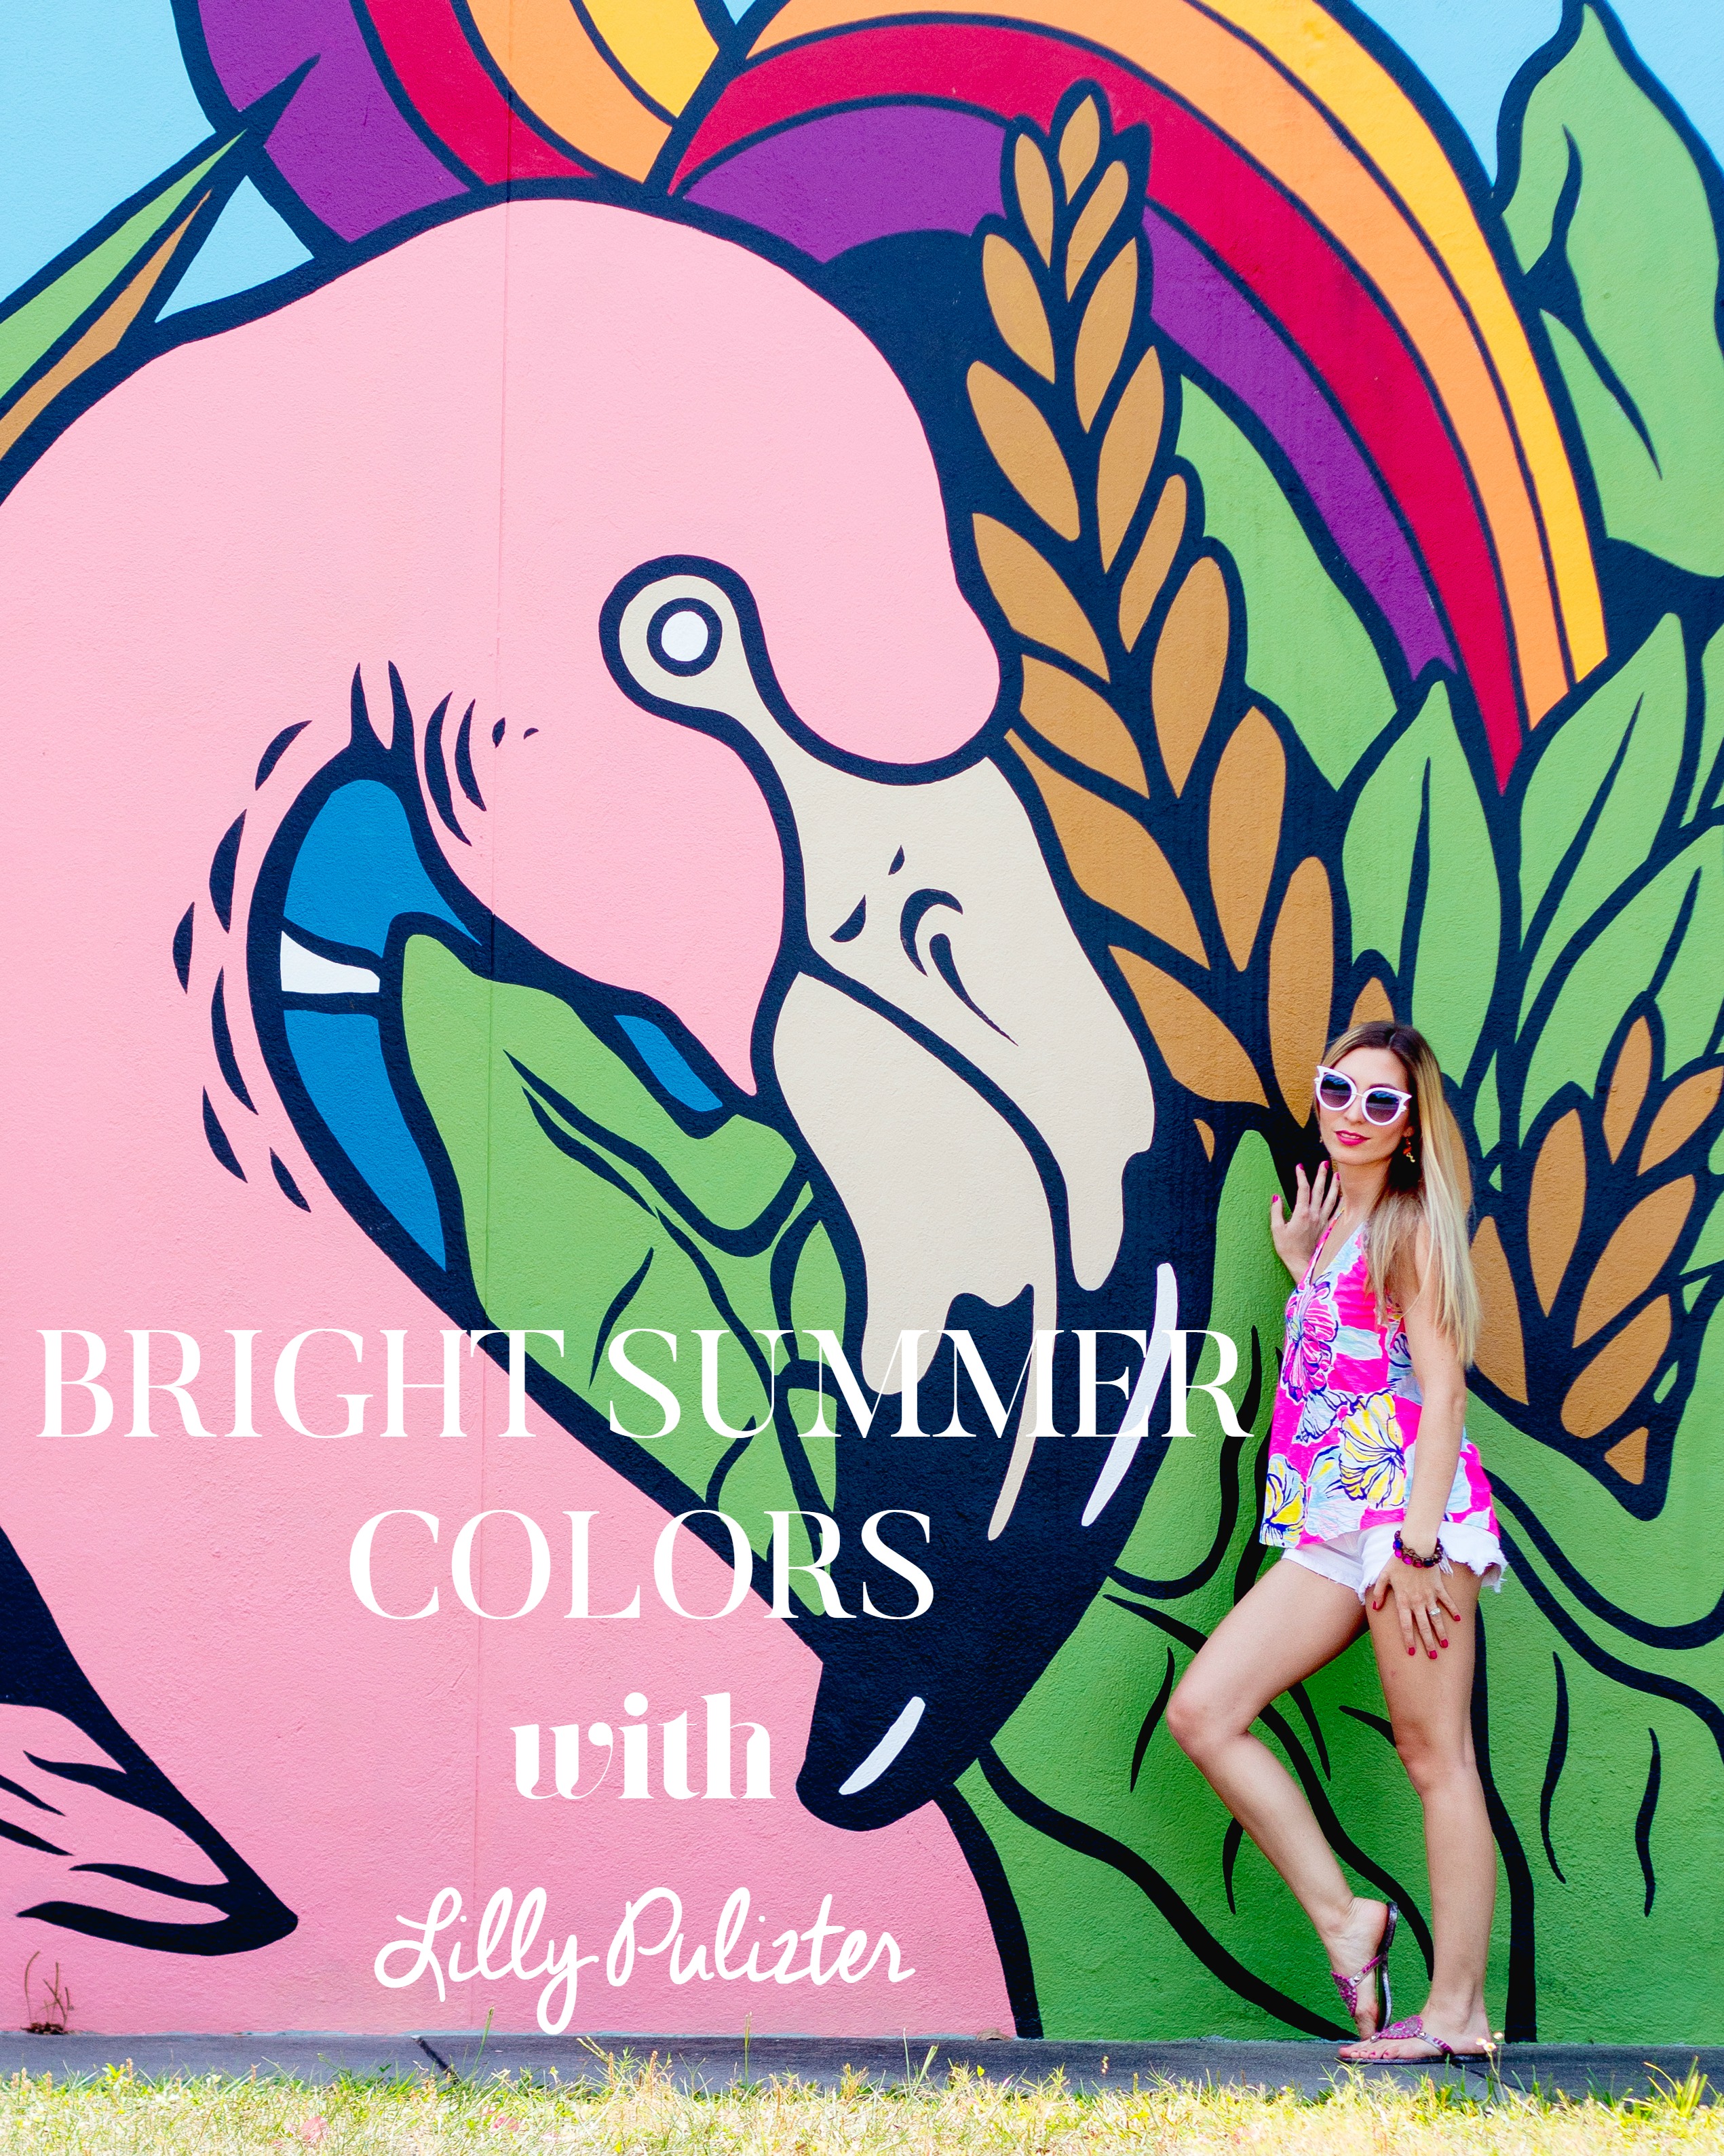 BRIGHT SUMMER COLORS WITH LILY PULITZER